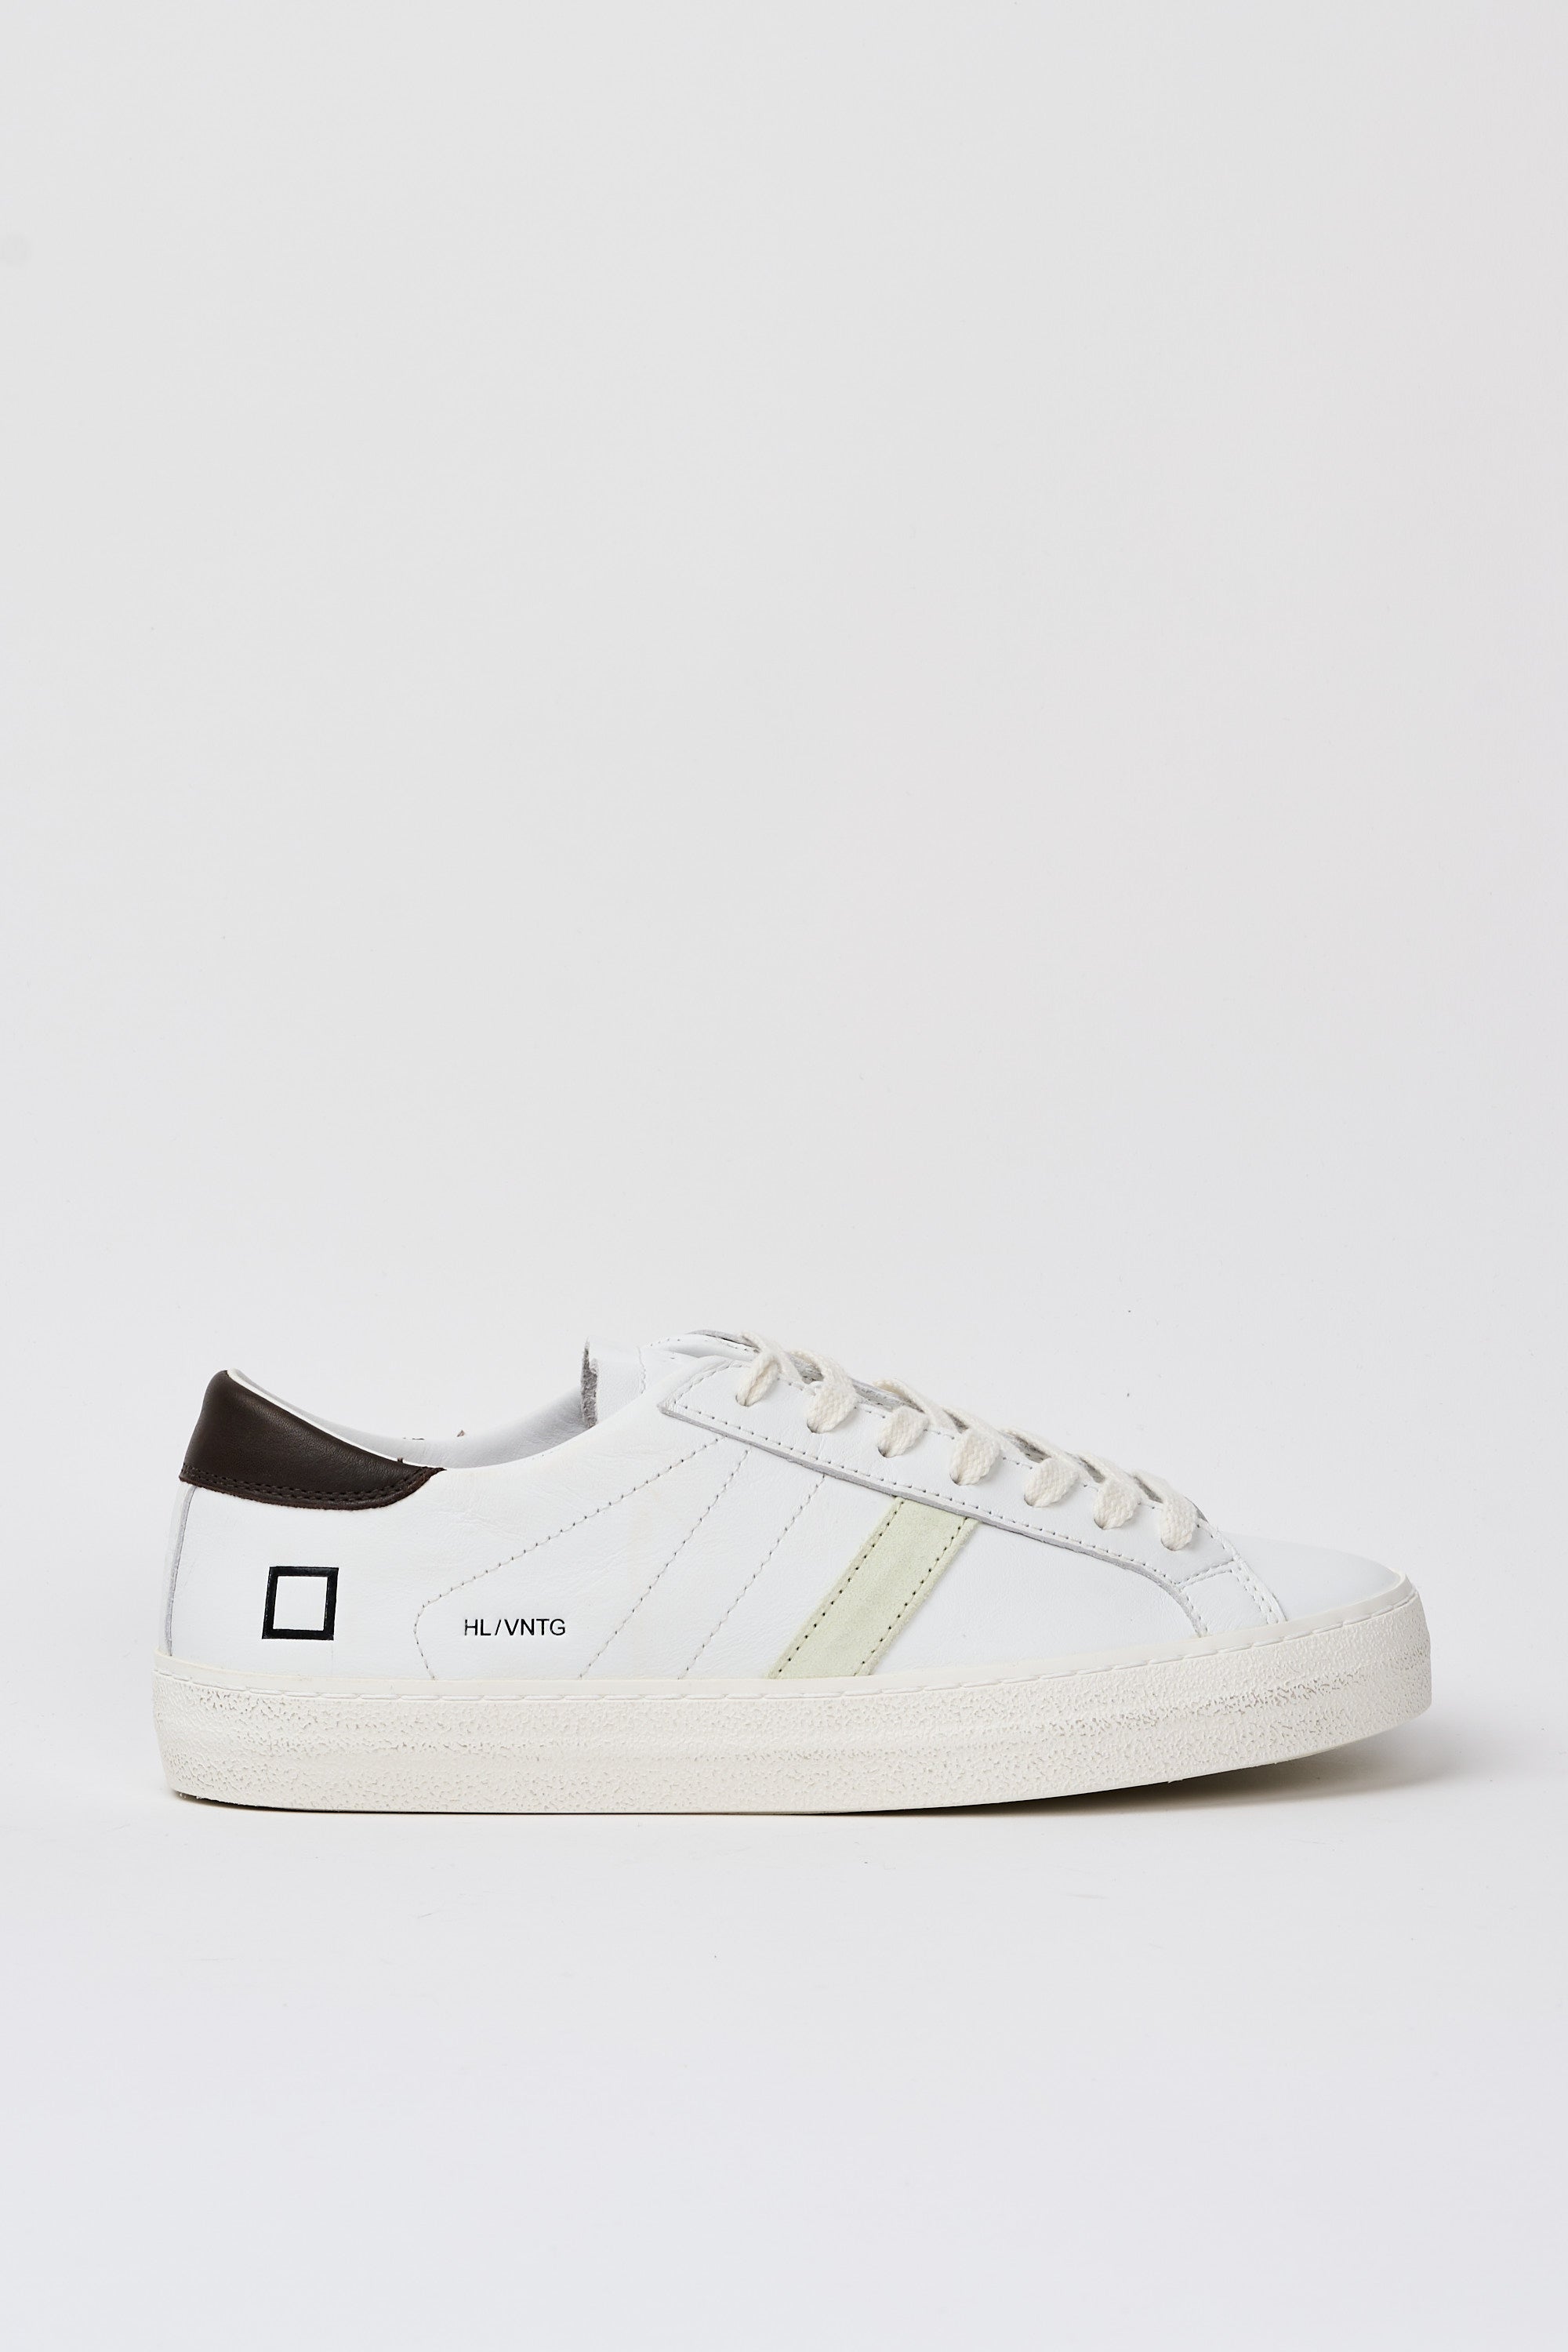 D.A.T.E. Sneakers Hill Low Vintage White/Dark Brown Leather-1